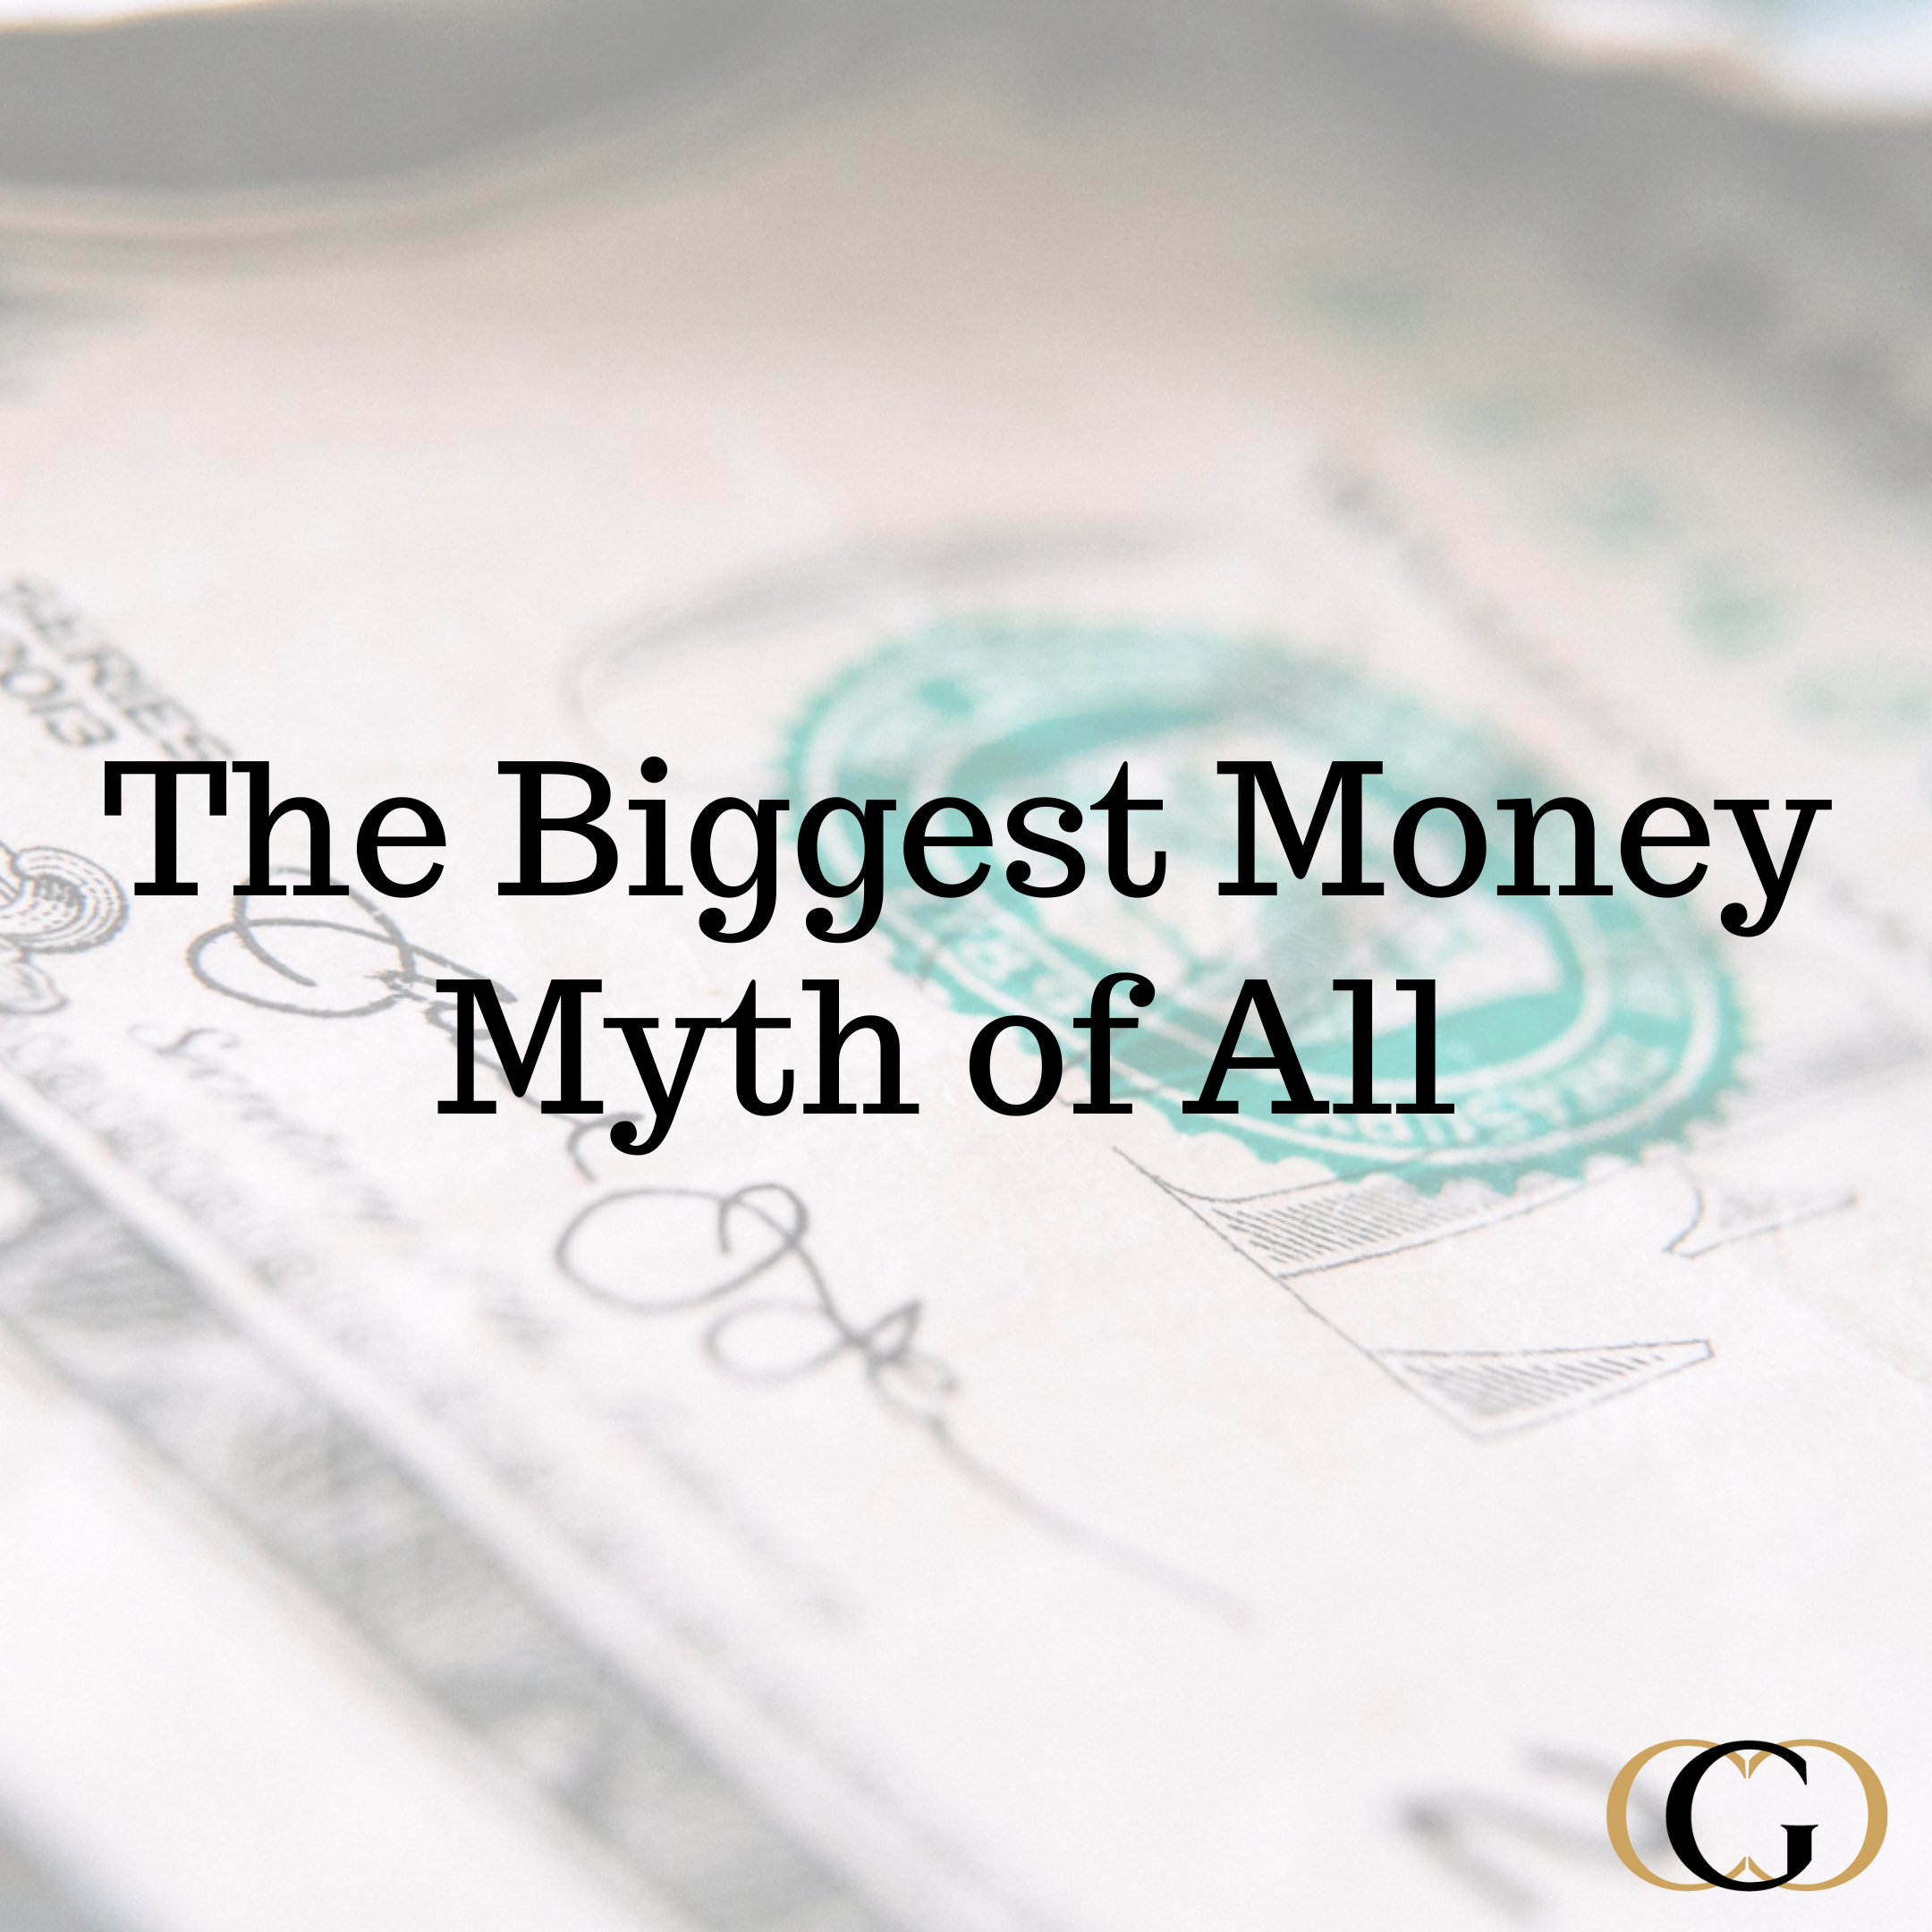 The Biggest Money Myth of All